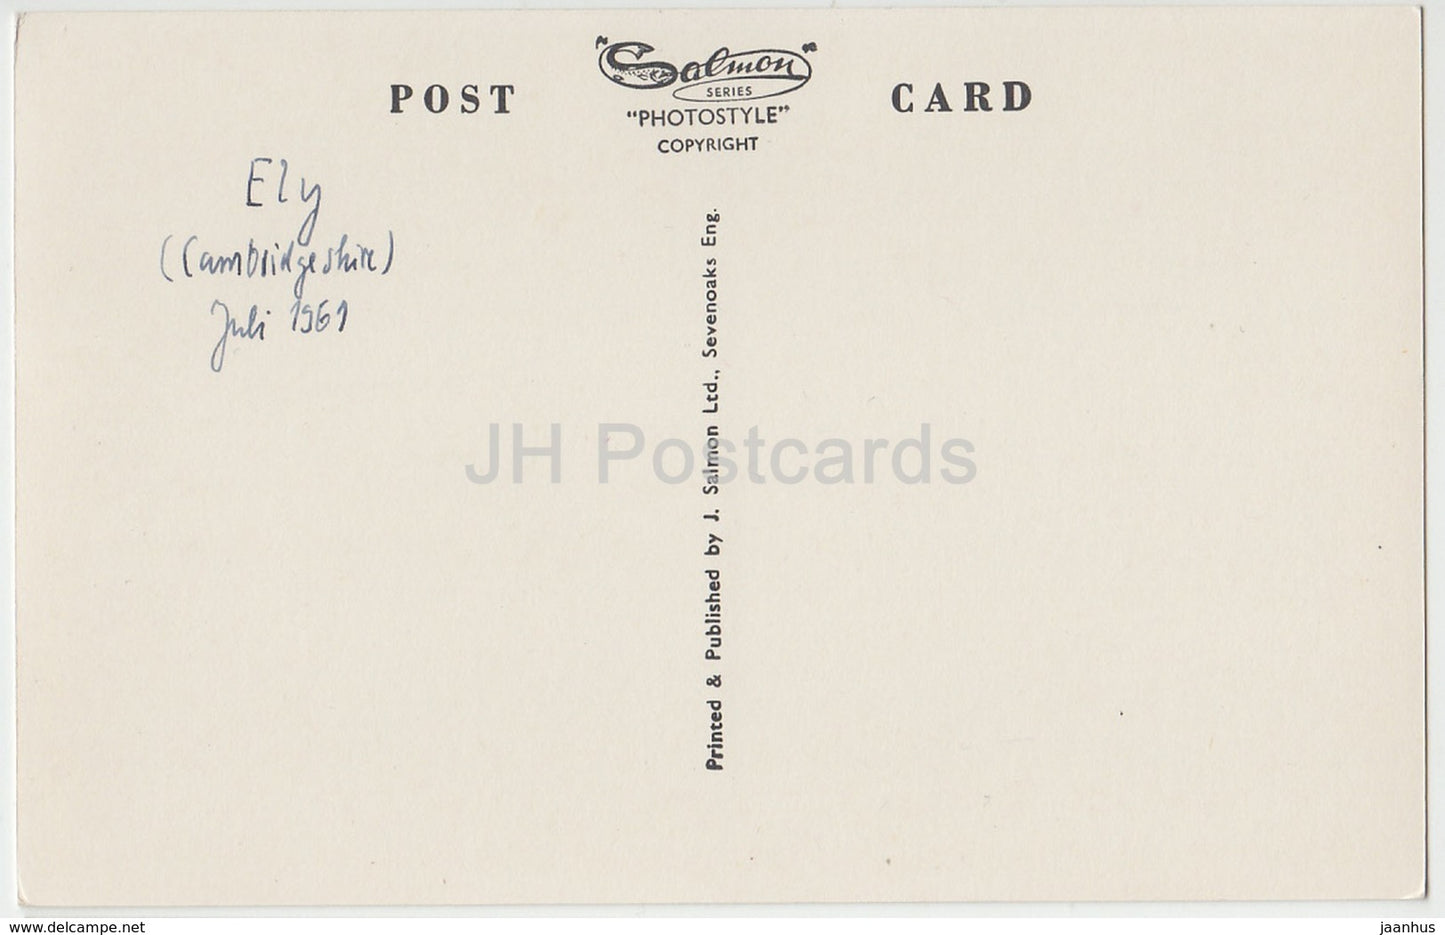 Ely - Cathedral and Bishop' s Palace - 12503 - 1961 - United Kingdom - England - used